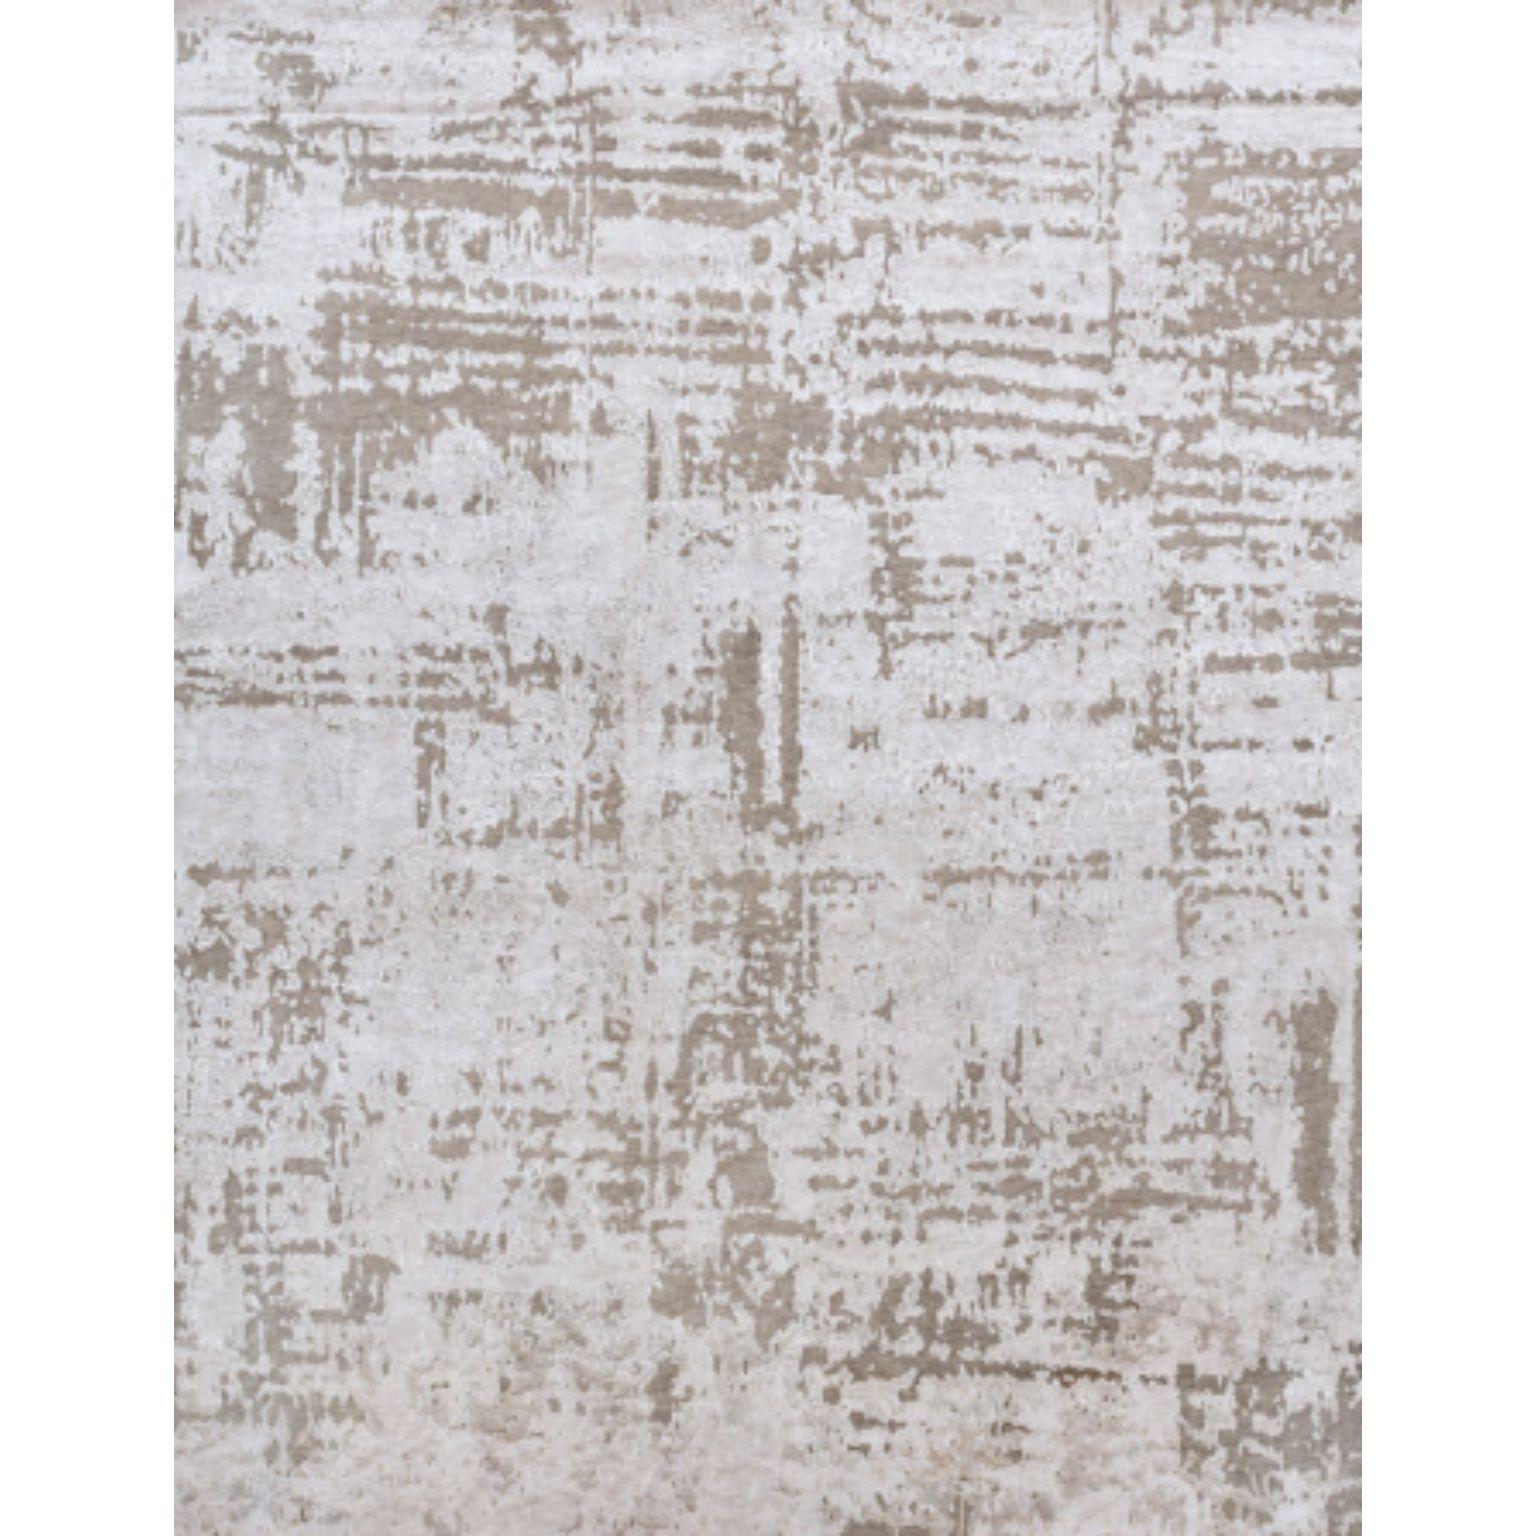 CONCRETE 200 rug by Illulian
Dimensions: D300 x H200 cm 
Materials: Wool 50%, Silk 50%
Variations available and prices may vary according to materials and sizes.

Illulian, historic and prestigious rug company brand, internationally renowned in